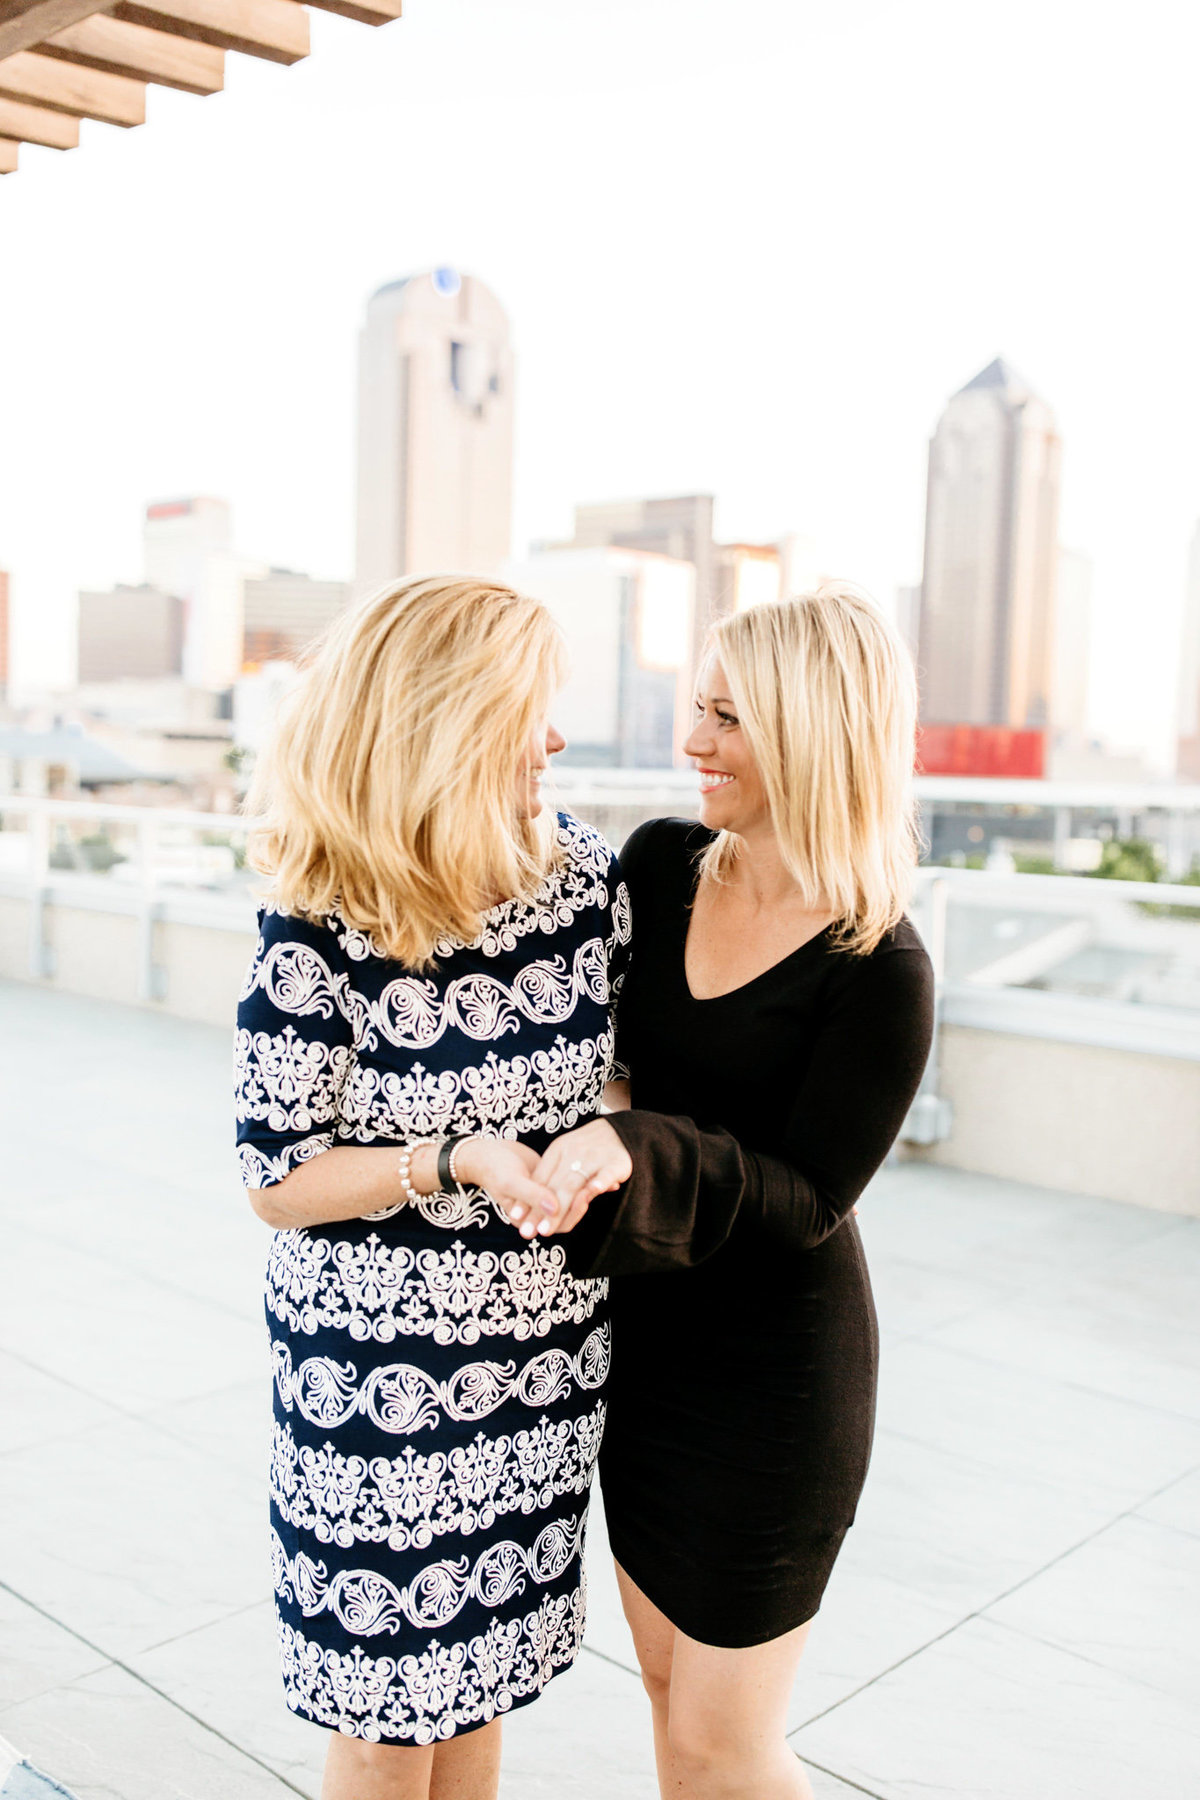 Eric & Megan - Downtown Dallas Rooftop Proposal & Engagement Session-161